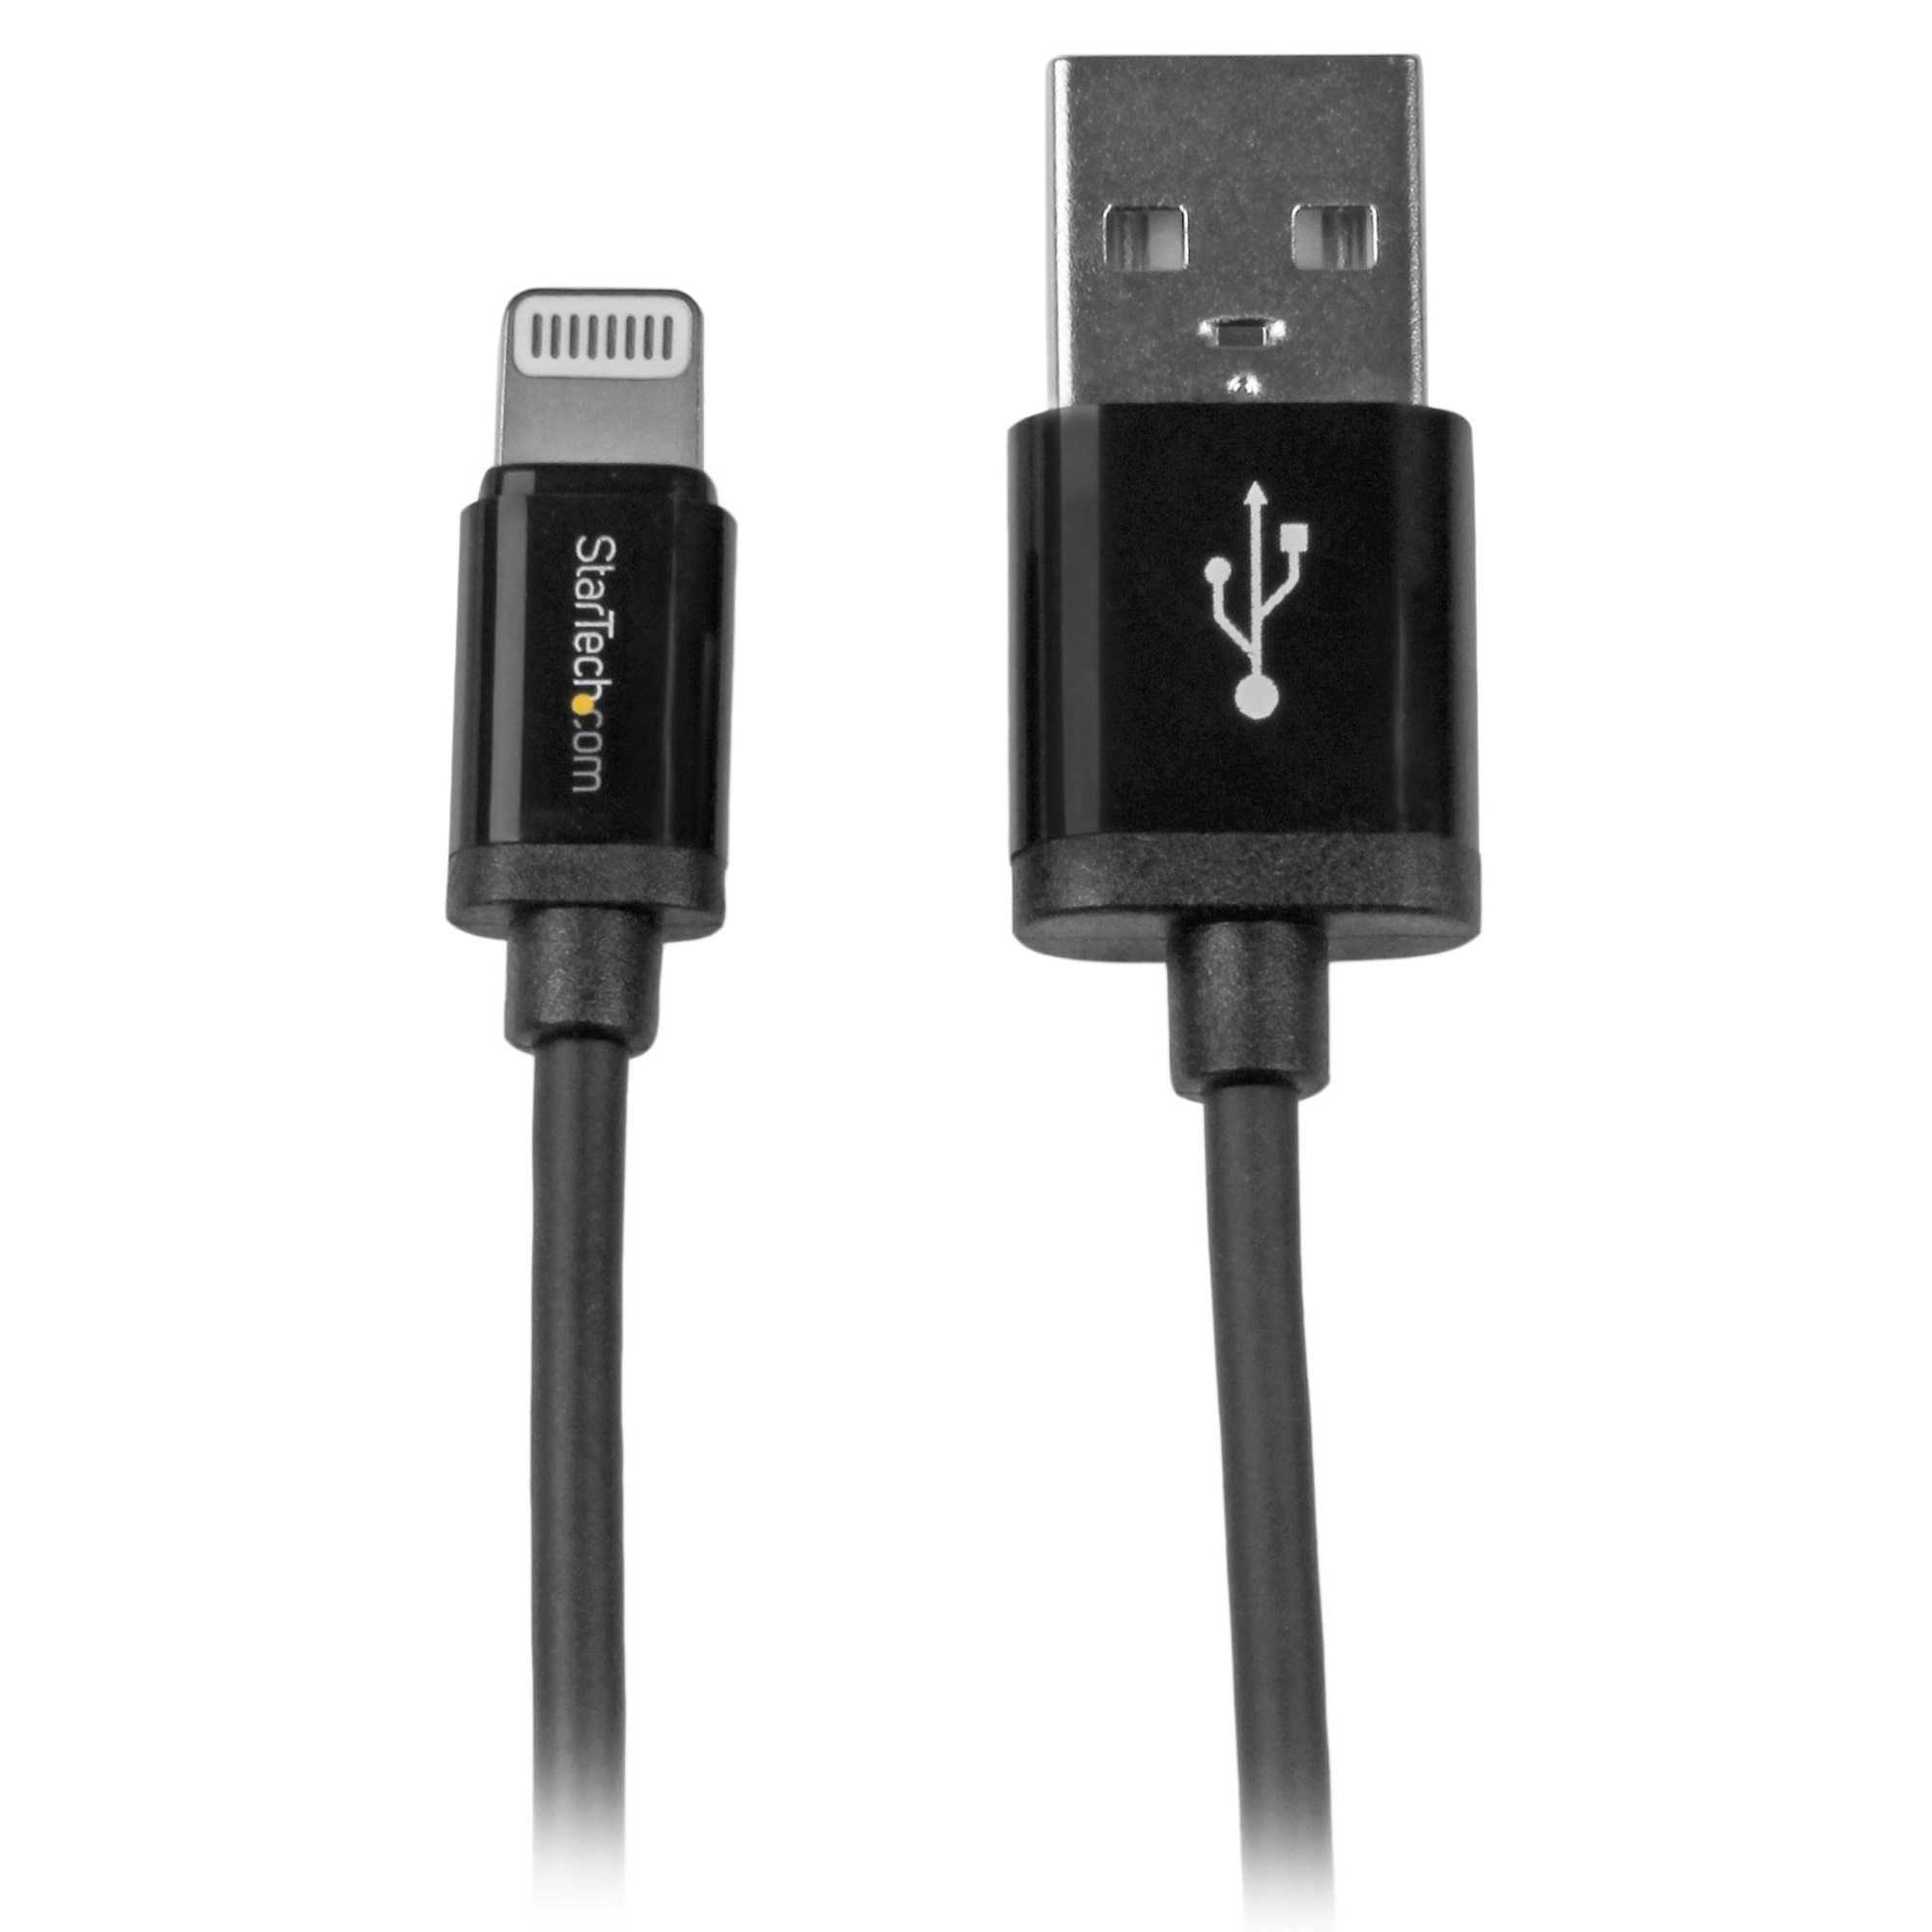 Sympathize Strait thong candidate 0.3m Black 8-pin Lightning to USB Cable - Lightning Cables